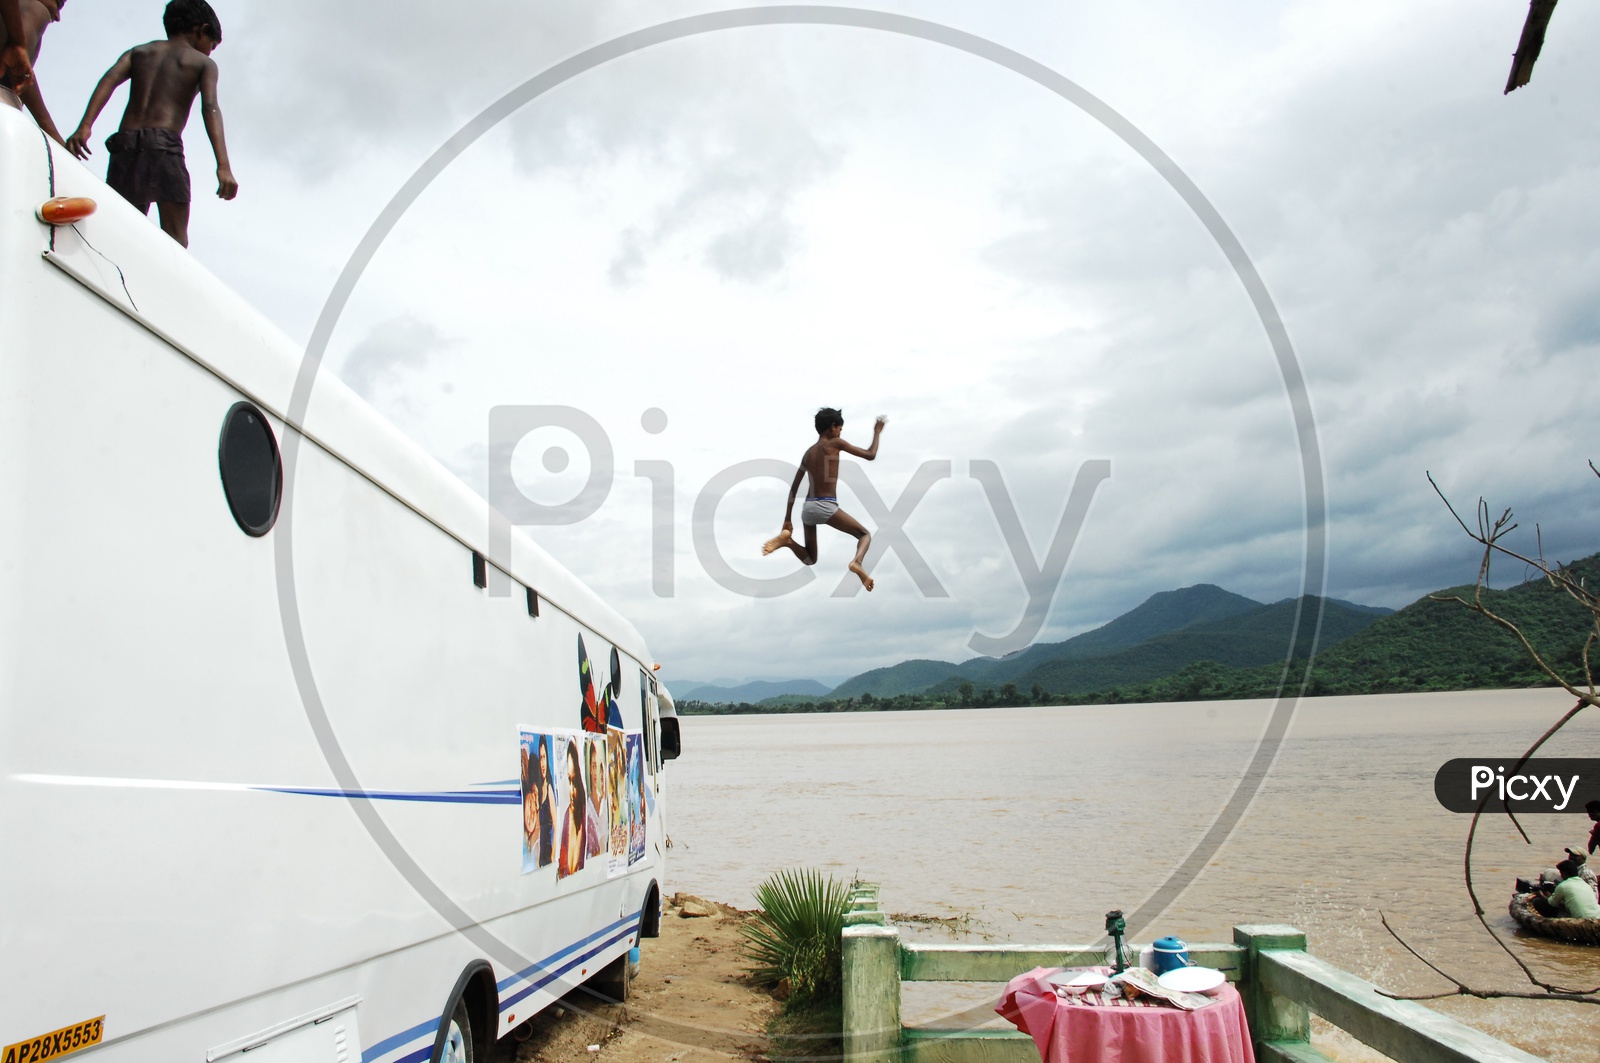 Boy Jumping Into River For Swimming